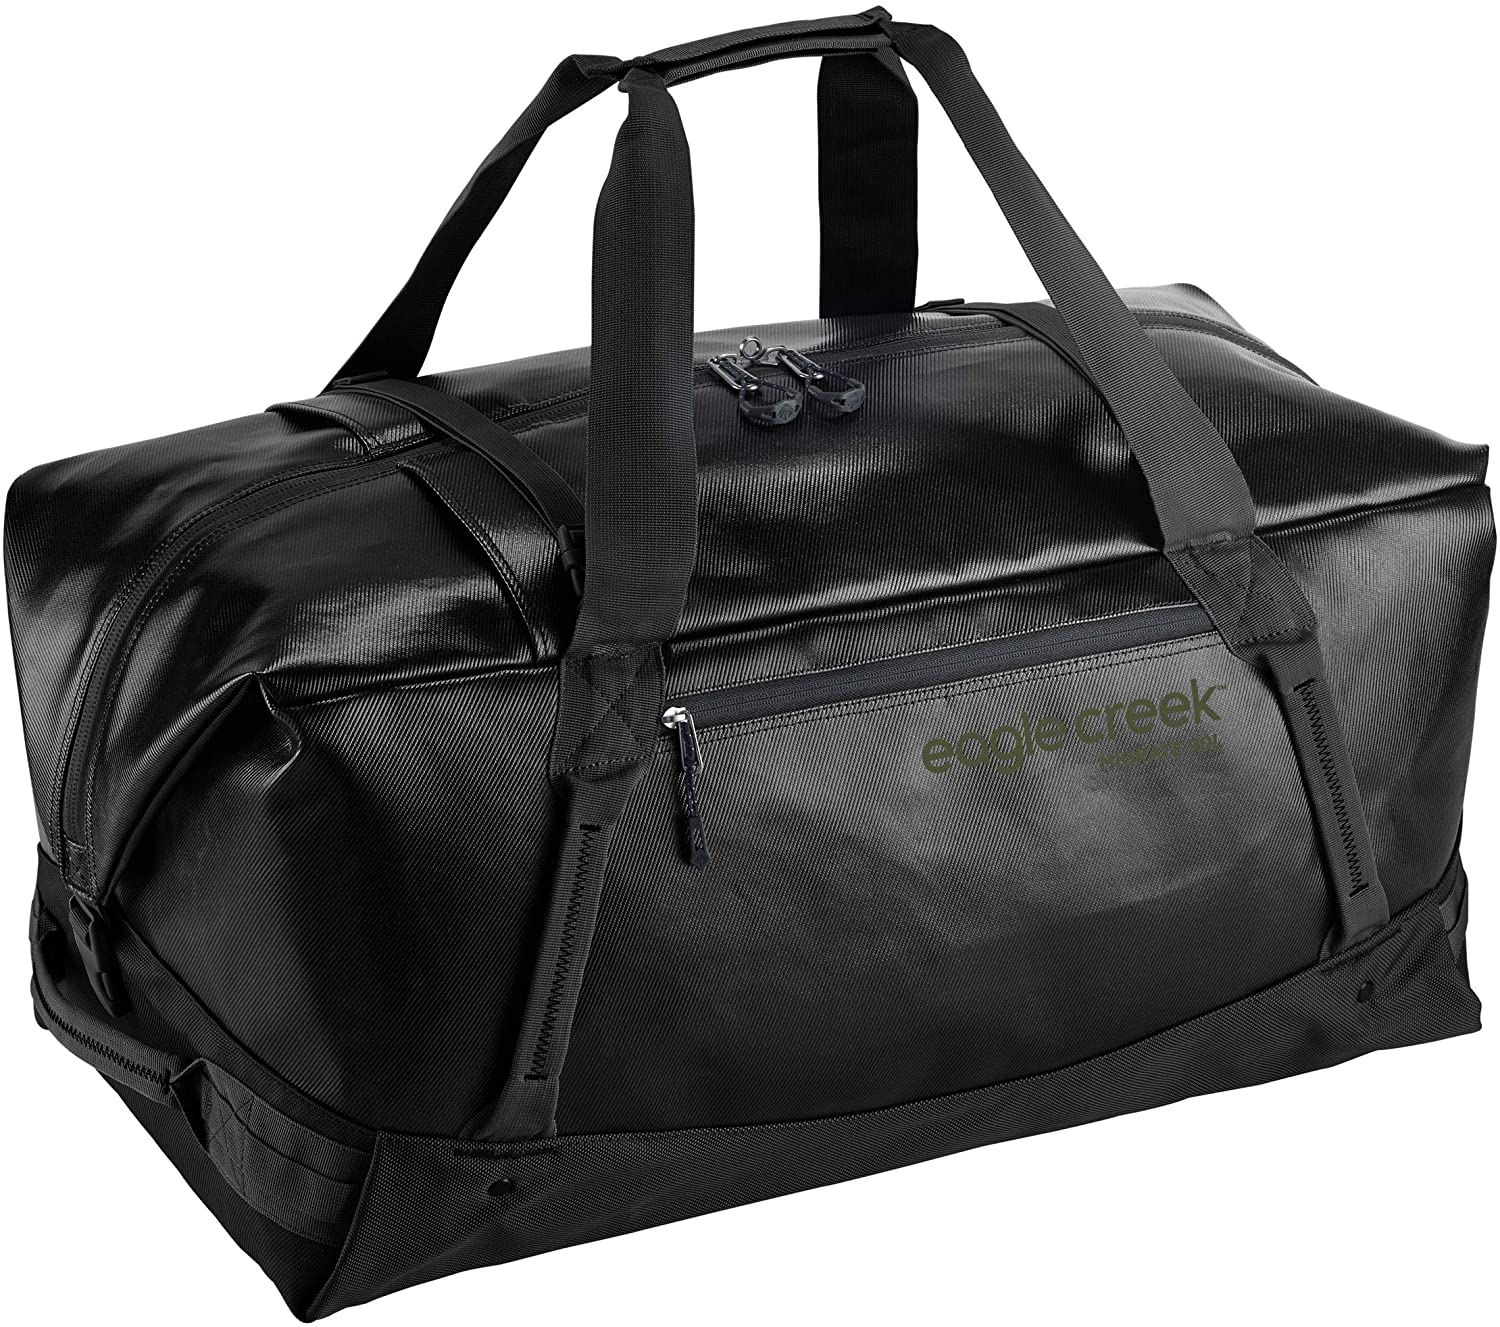 Eagle Creek Migrate Duffel 90 Liters in Jet Black color from the front